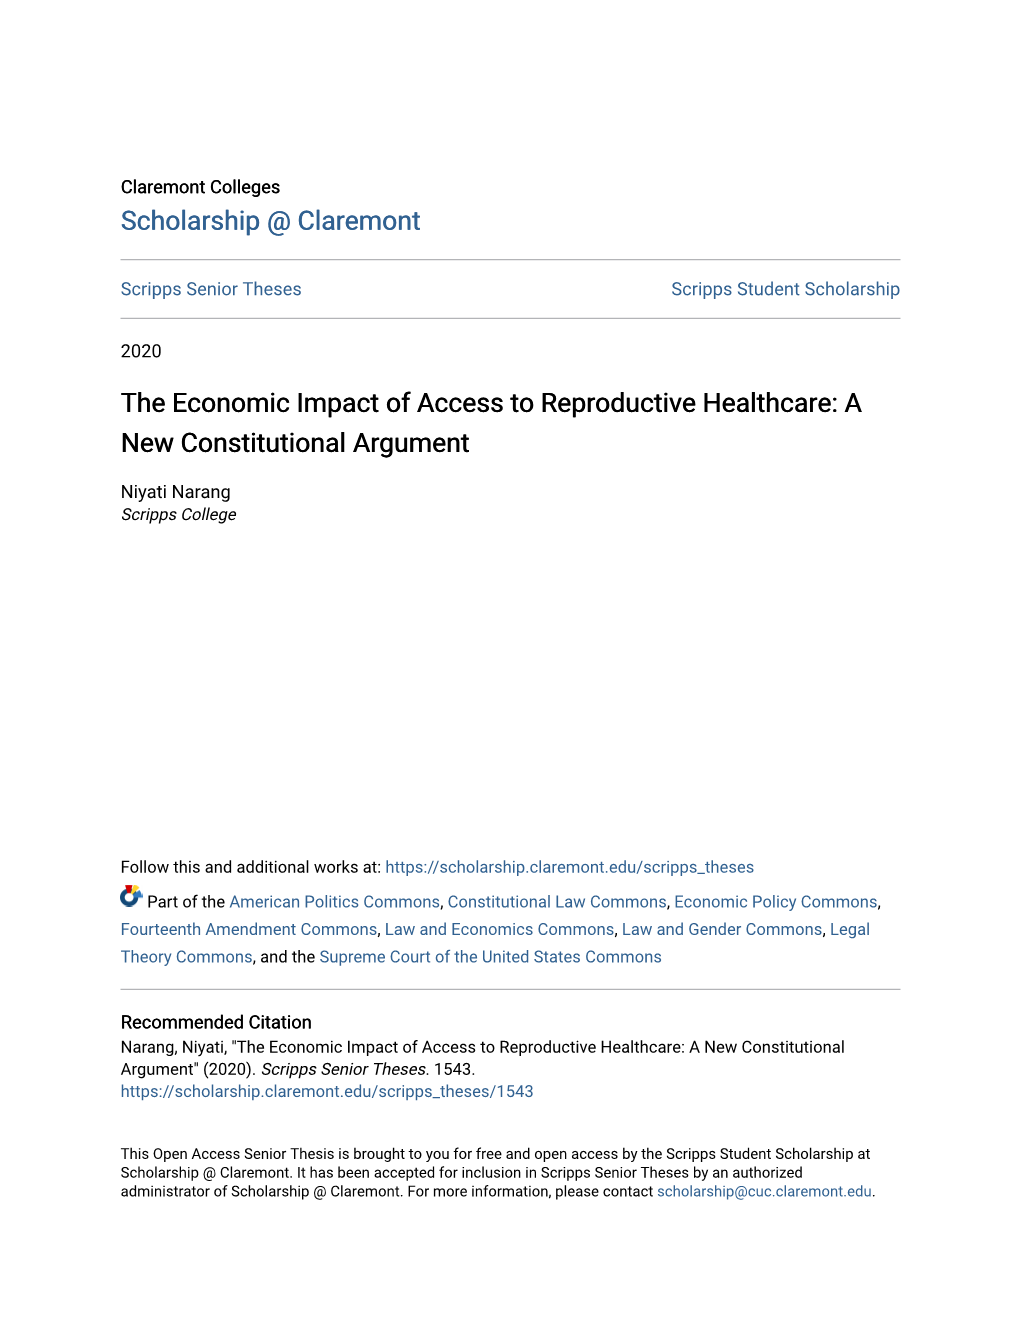 The Economic Impact of Access to Reproductive Healthcare: a New Constitutional Argument